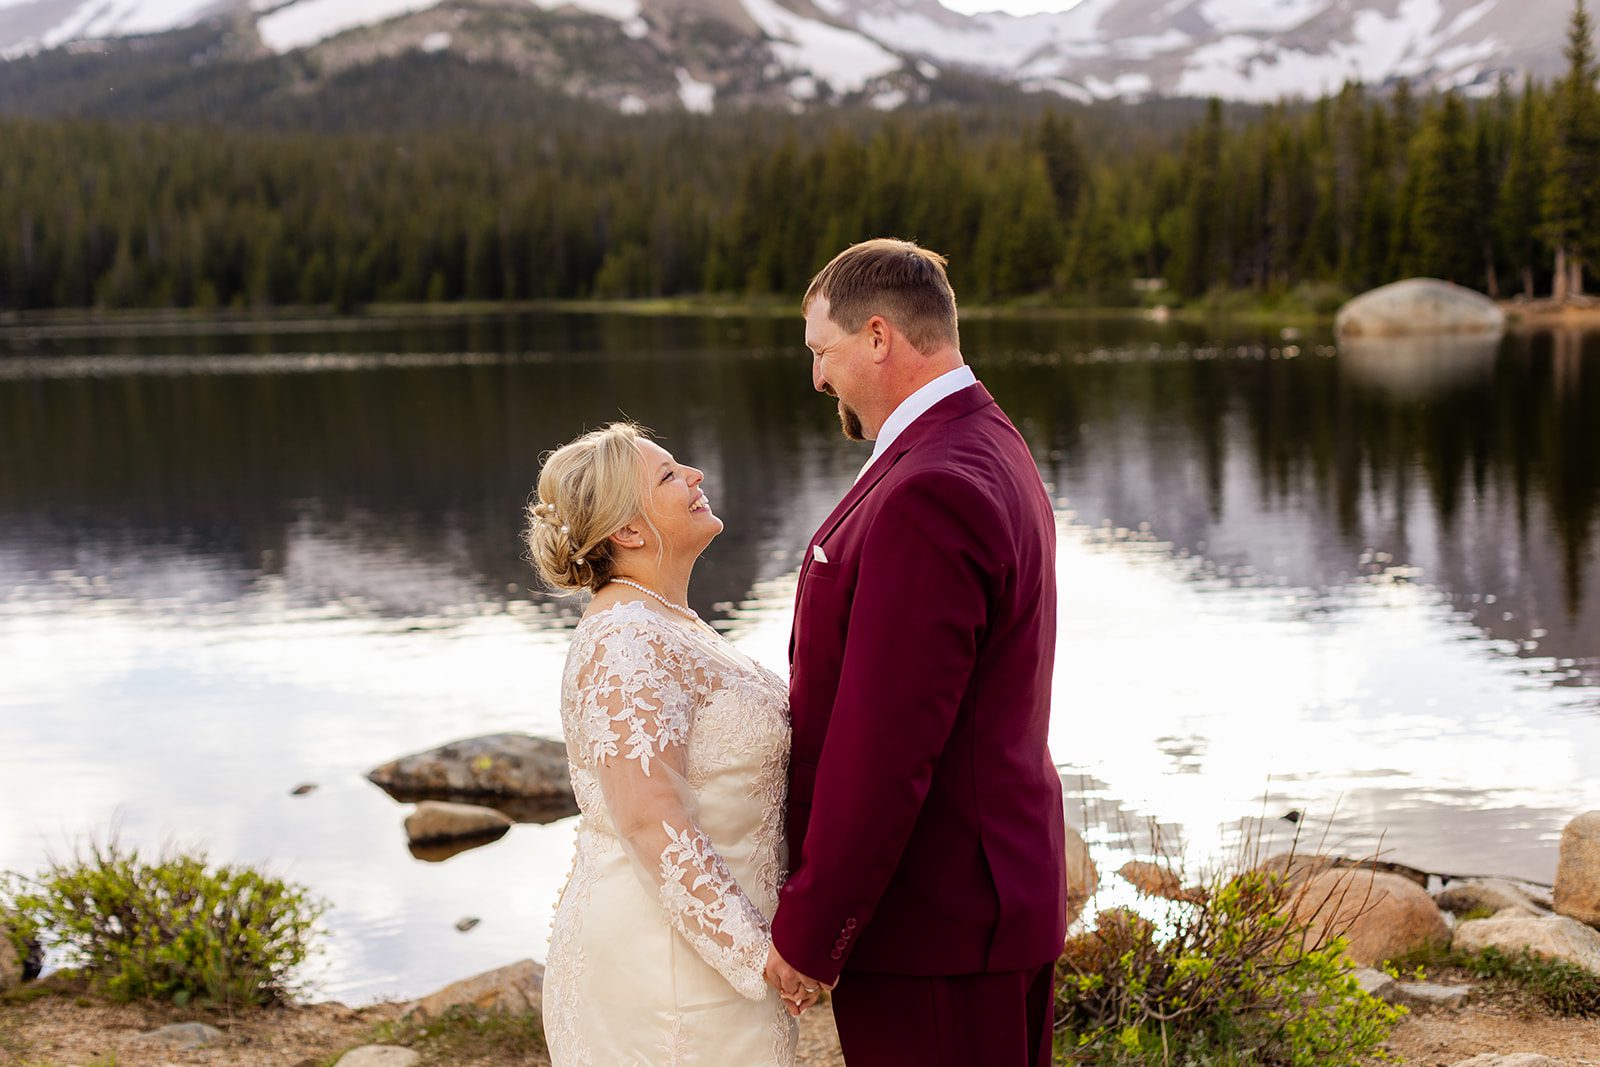 Bride and groom smiling at each other with Brainard Lake in the backdrop.